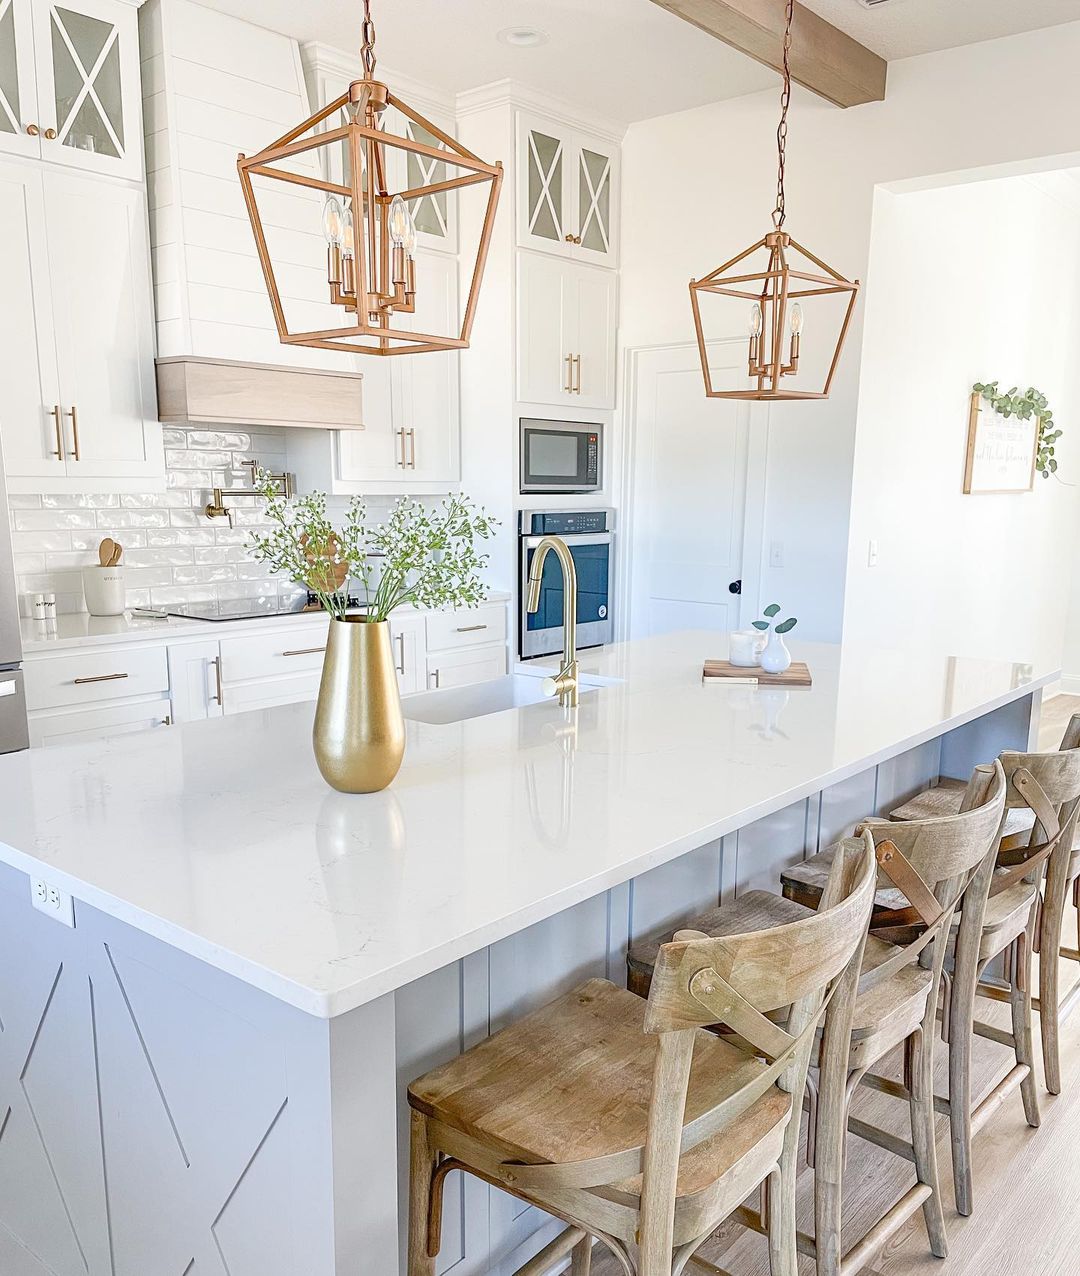 Bright kitchen with white stone countertops and cabinetry. Photo by Instagram user @thewhitehouseonpineridge